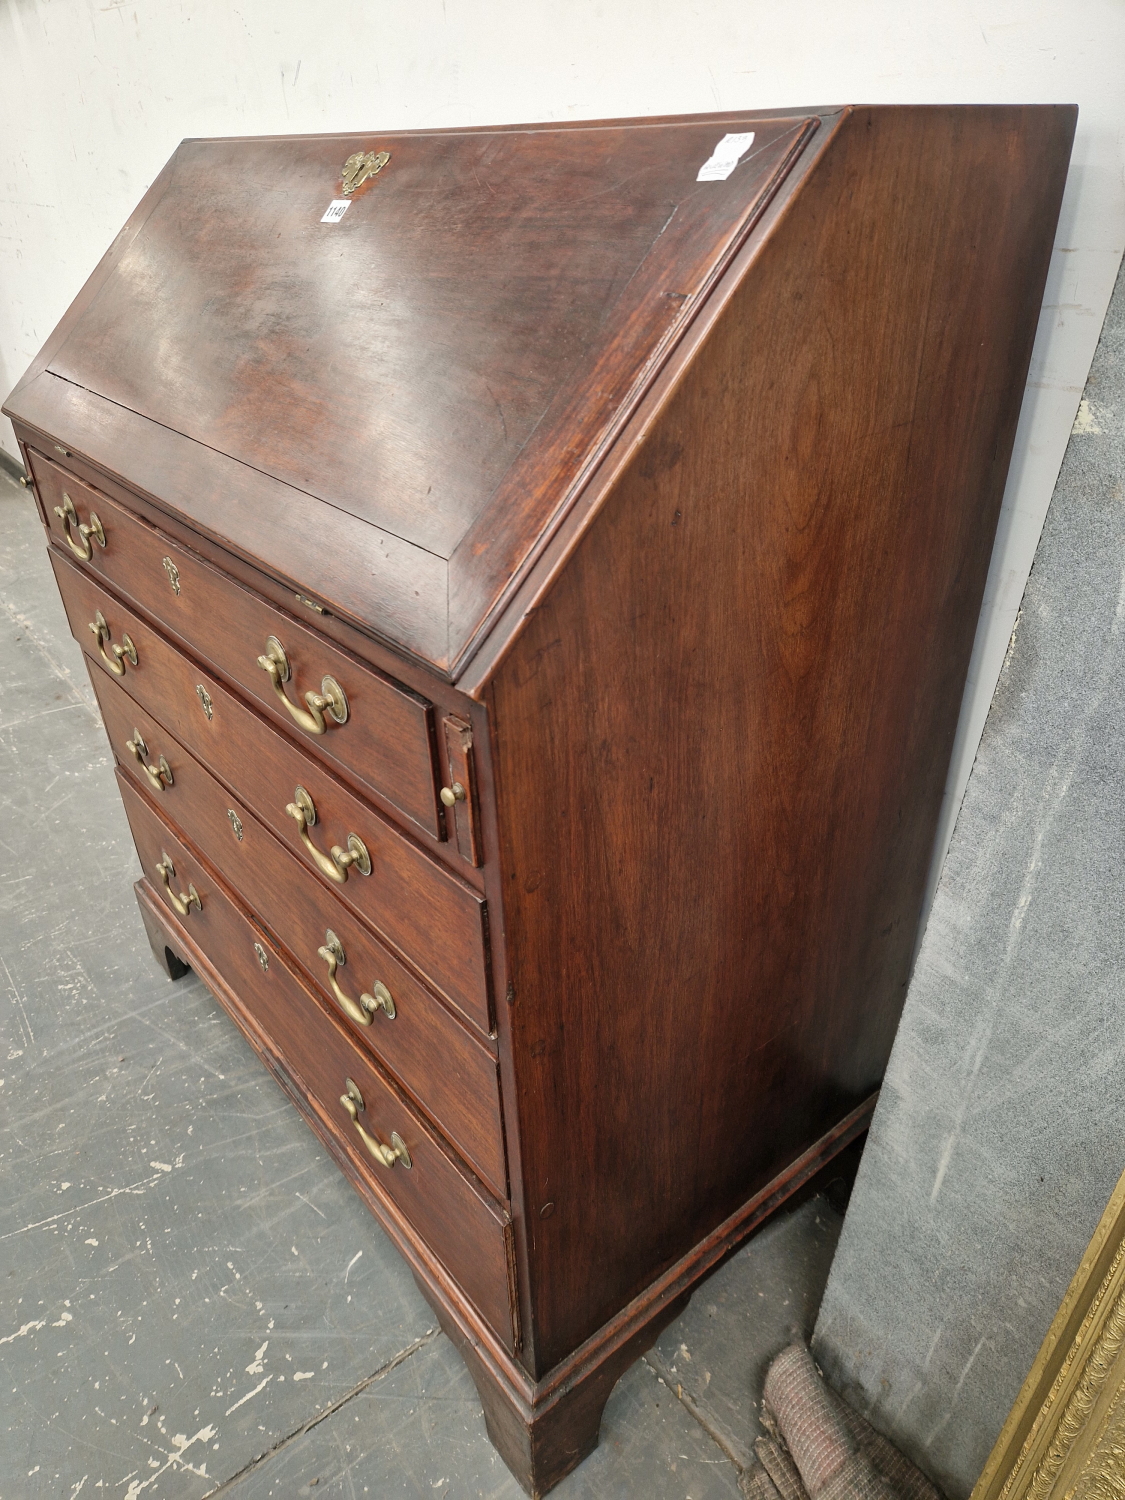 A GEORGE III FRUIT WOOD BUREAU, THE FALL ABOVE FOUR GRADED DRAWERS - Image 6 of 6